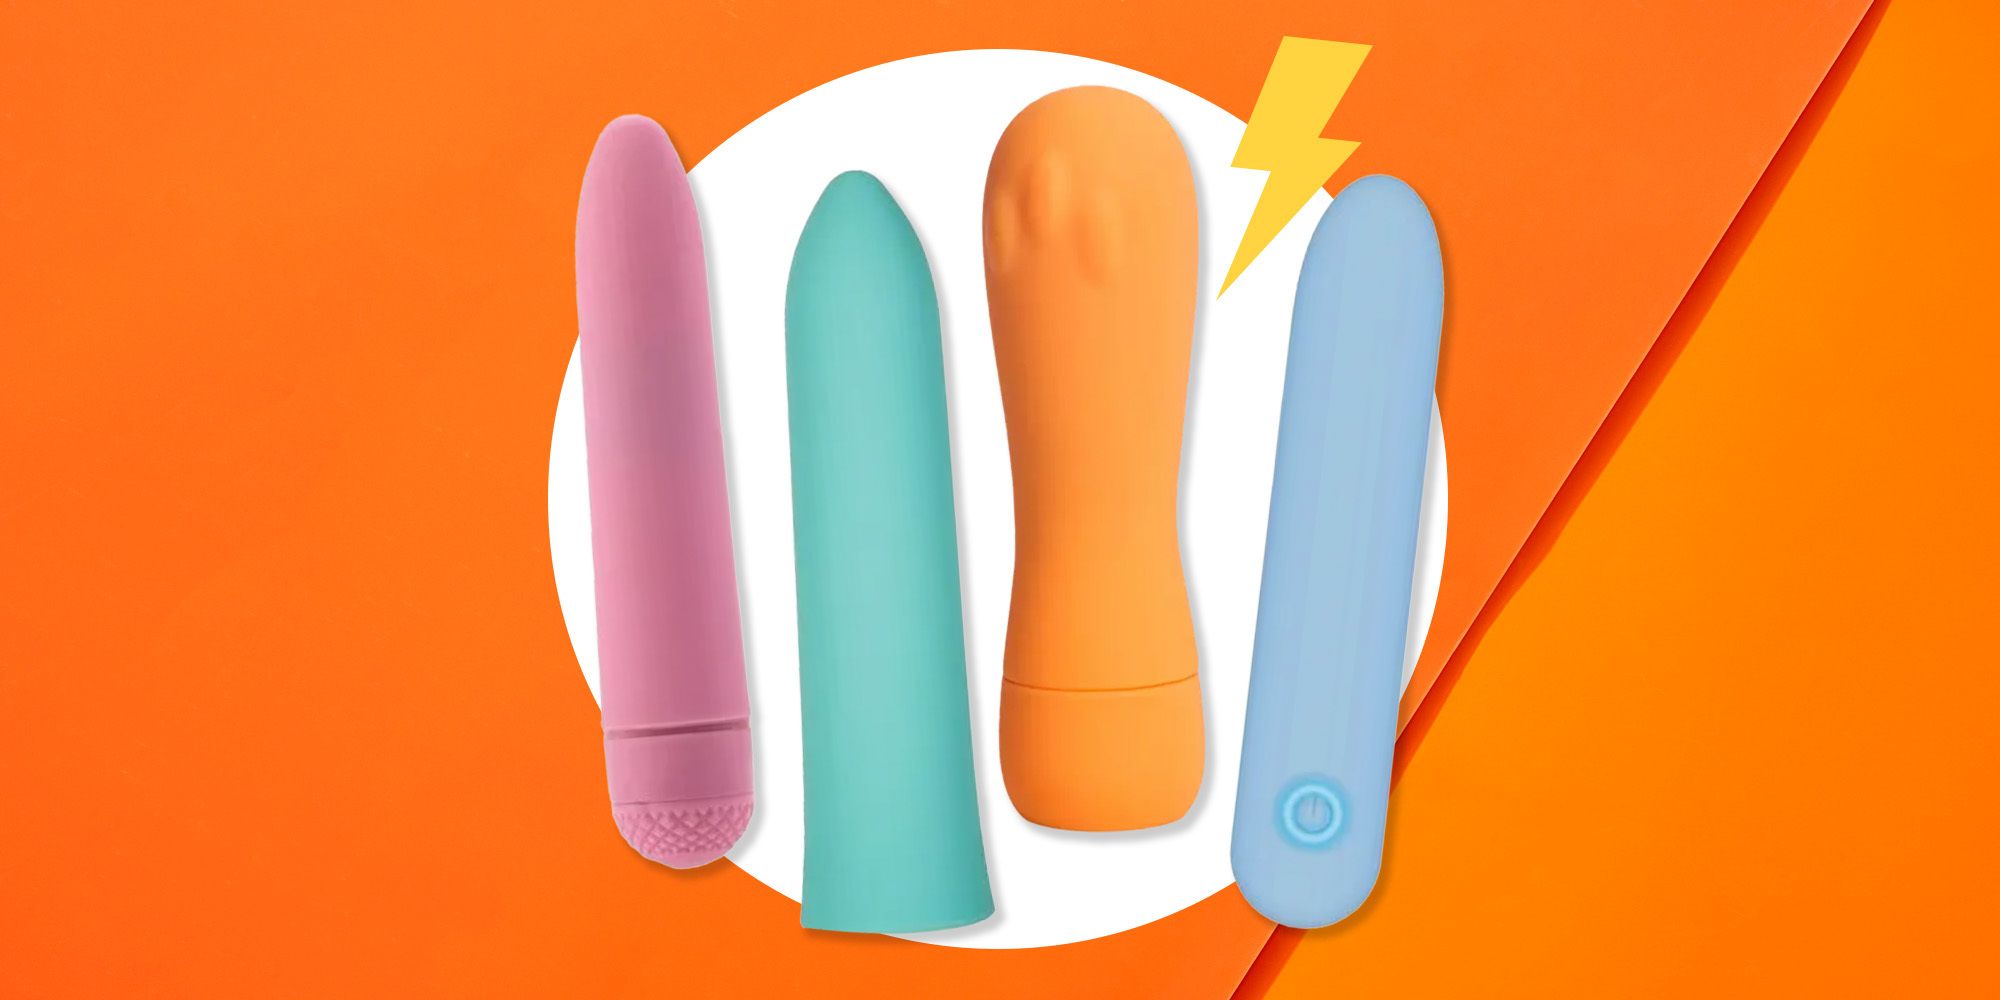 7 ridiculously large sex toys to help you go big in the bedroom